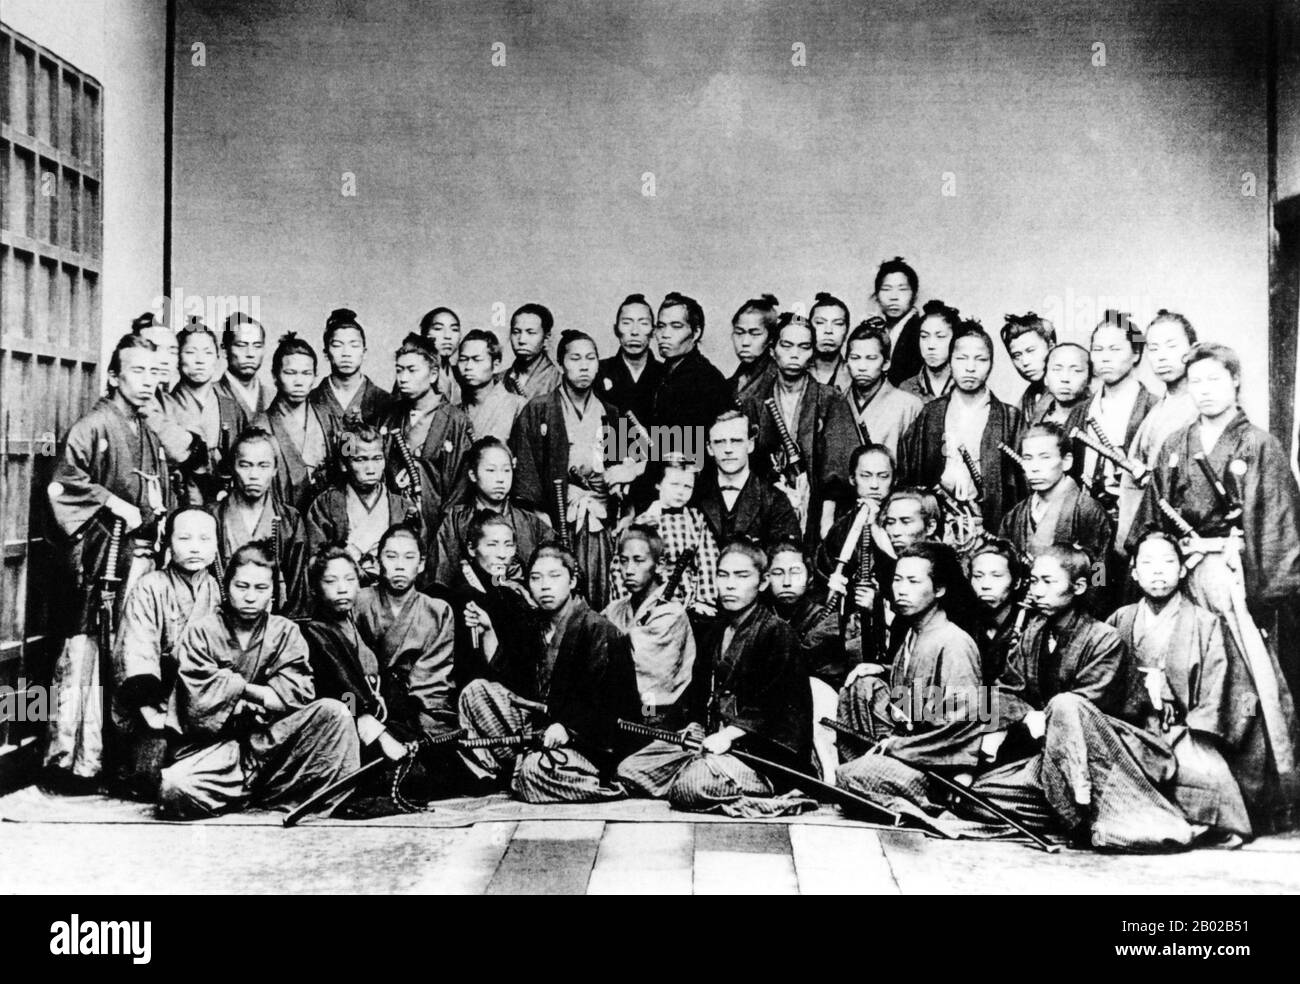 Guido Herman Fridolin Verbeck (born Verbeek) (28 January 1830 – 10 May 1898) was a Dutch political advisor, educator, and missionary active in Bakumatsu and Meiji period Japan. He was one of the most important o-yatoi gaikokujin (foreign advisors) serving the Meiji government and contributed to many major government decisions during the early years of the reign of Emperor Meiji. Stock Photo